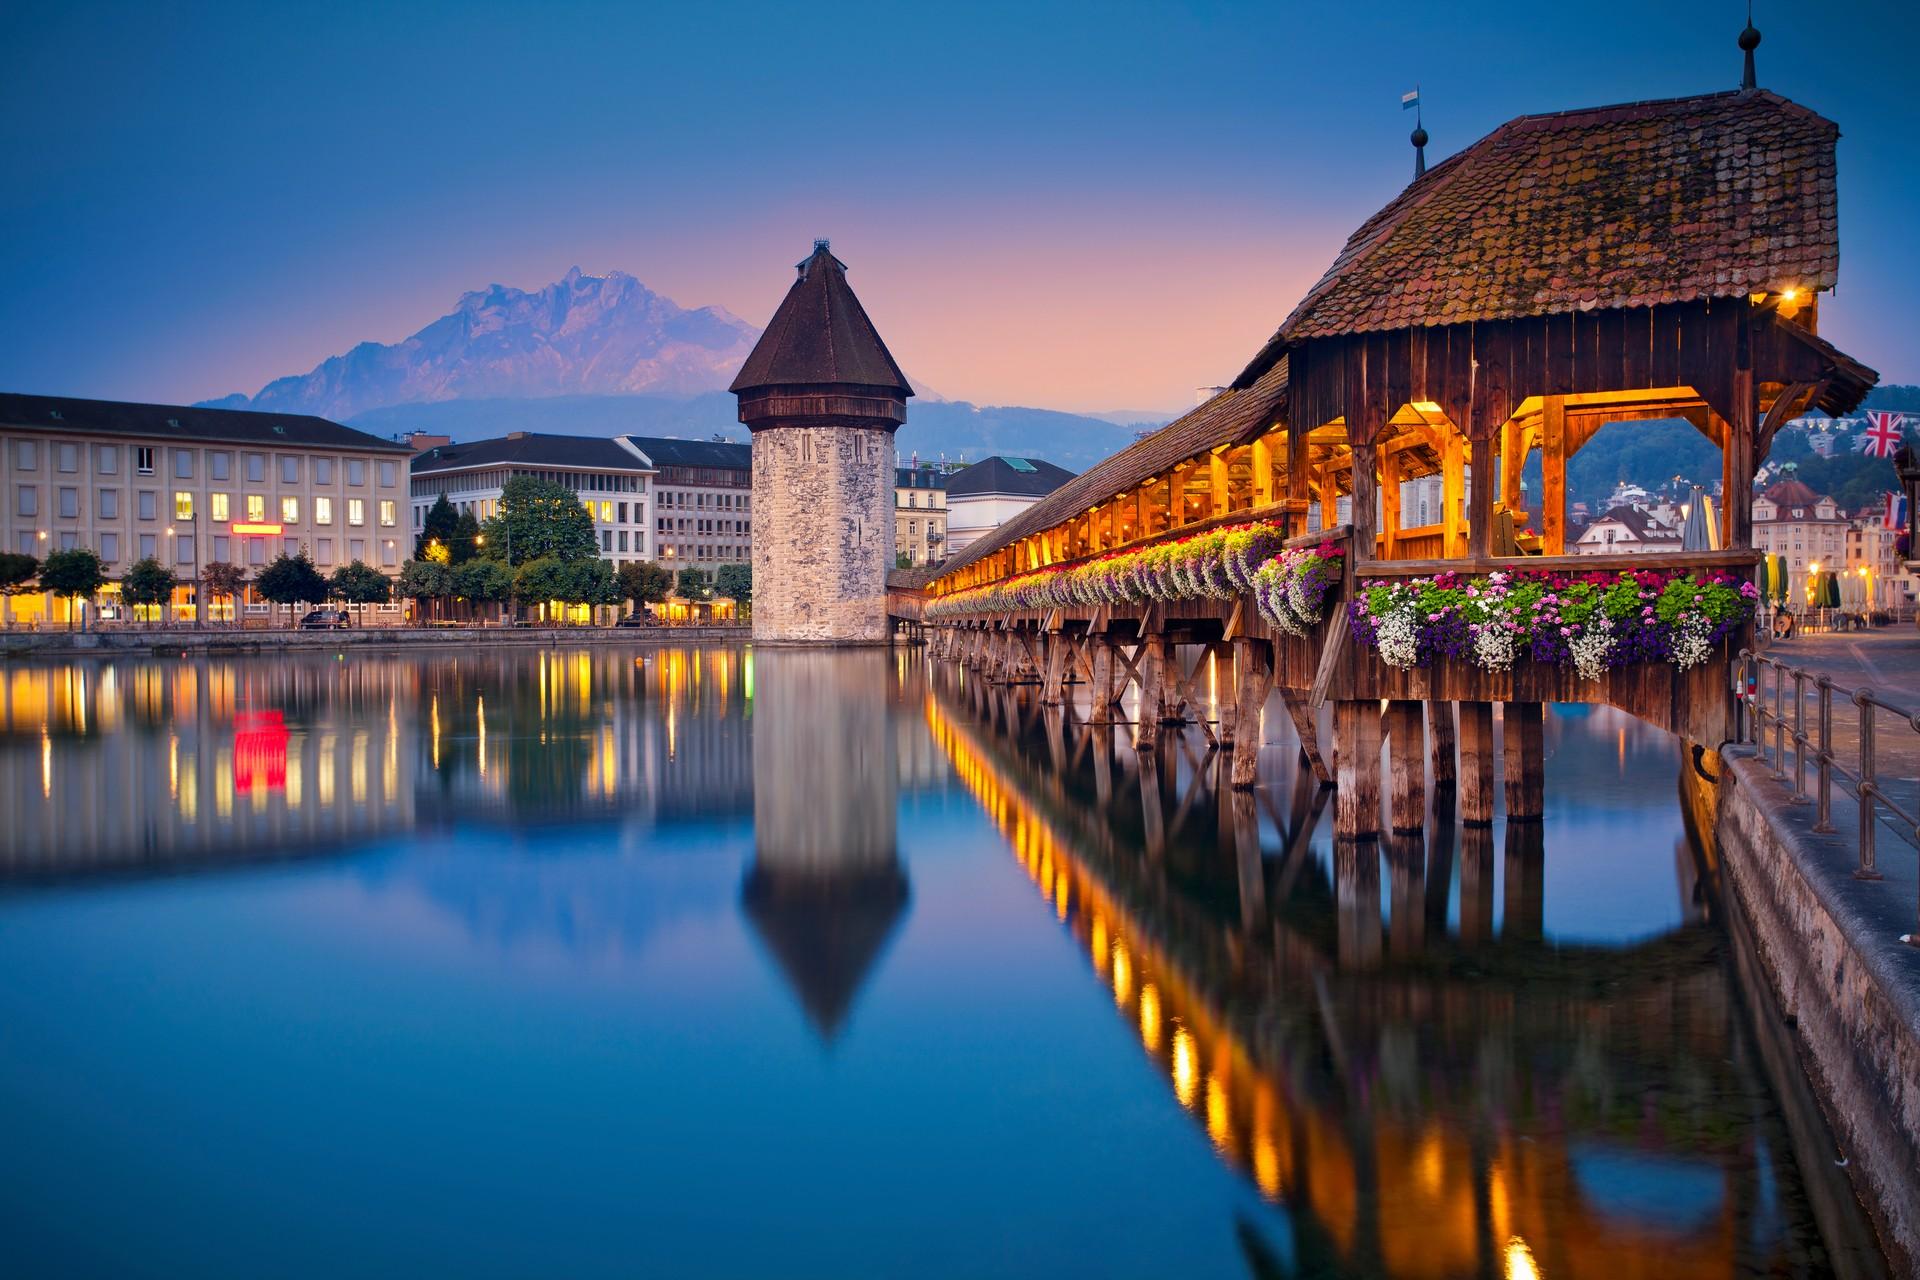 Architecture in Luzern at sunset time